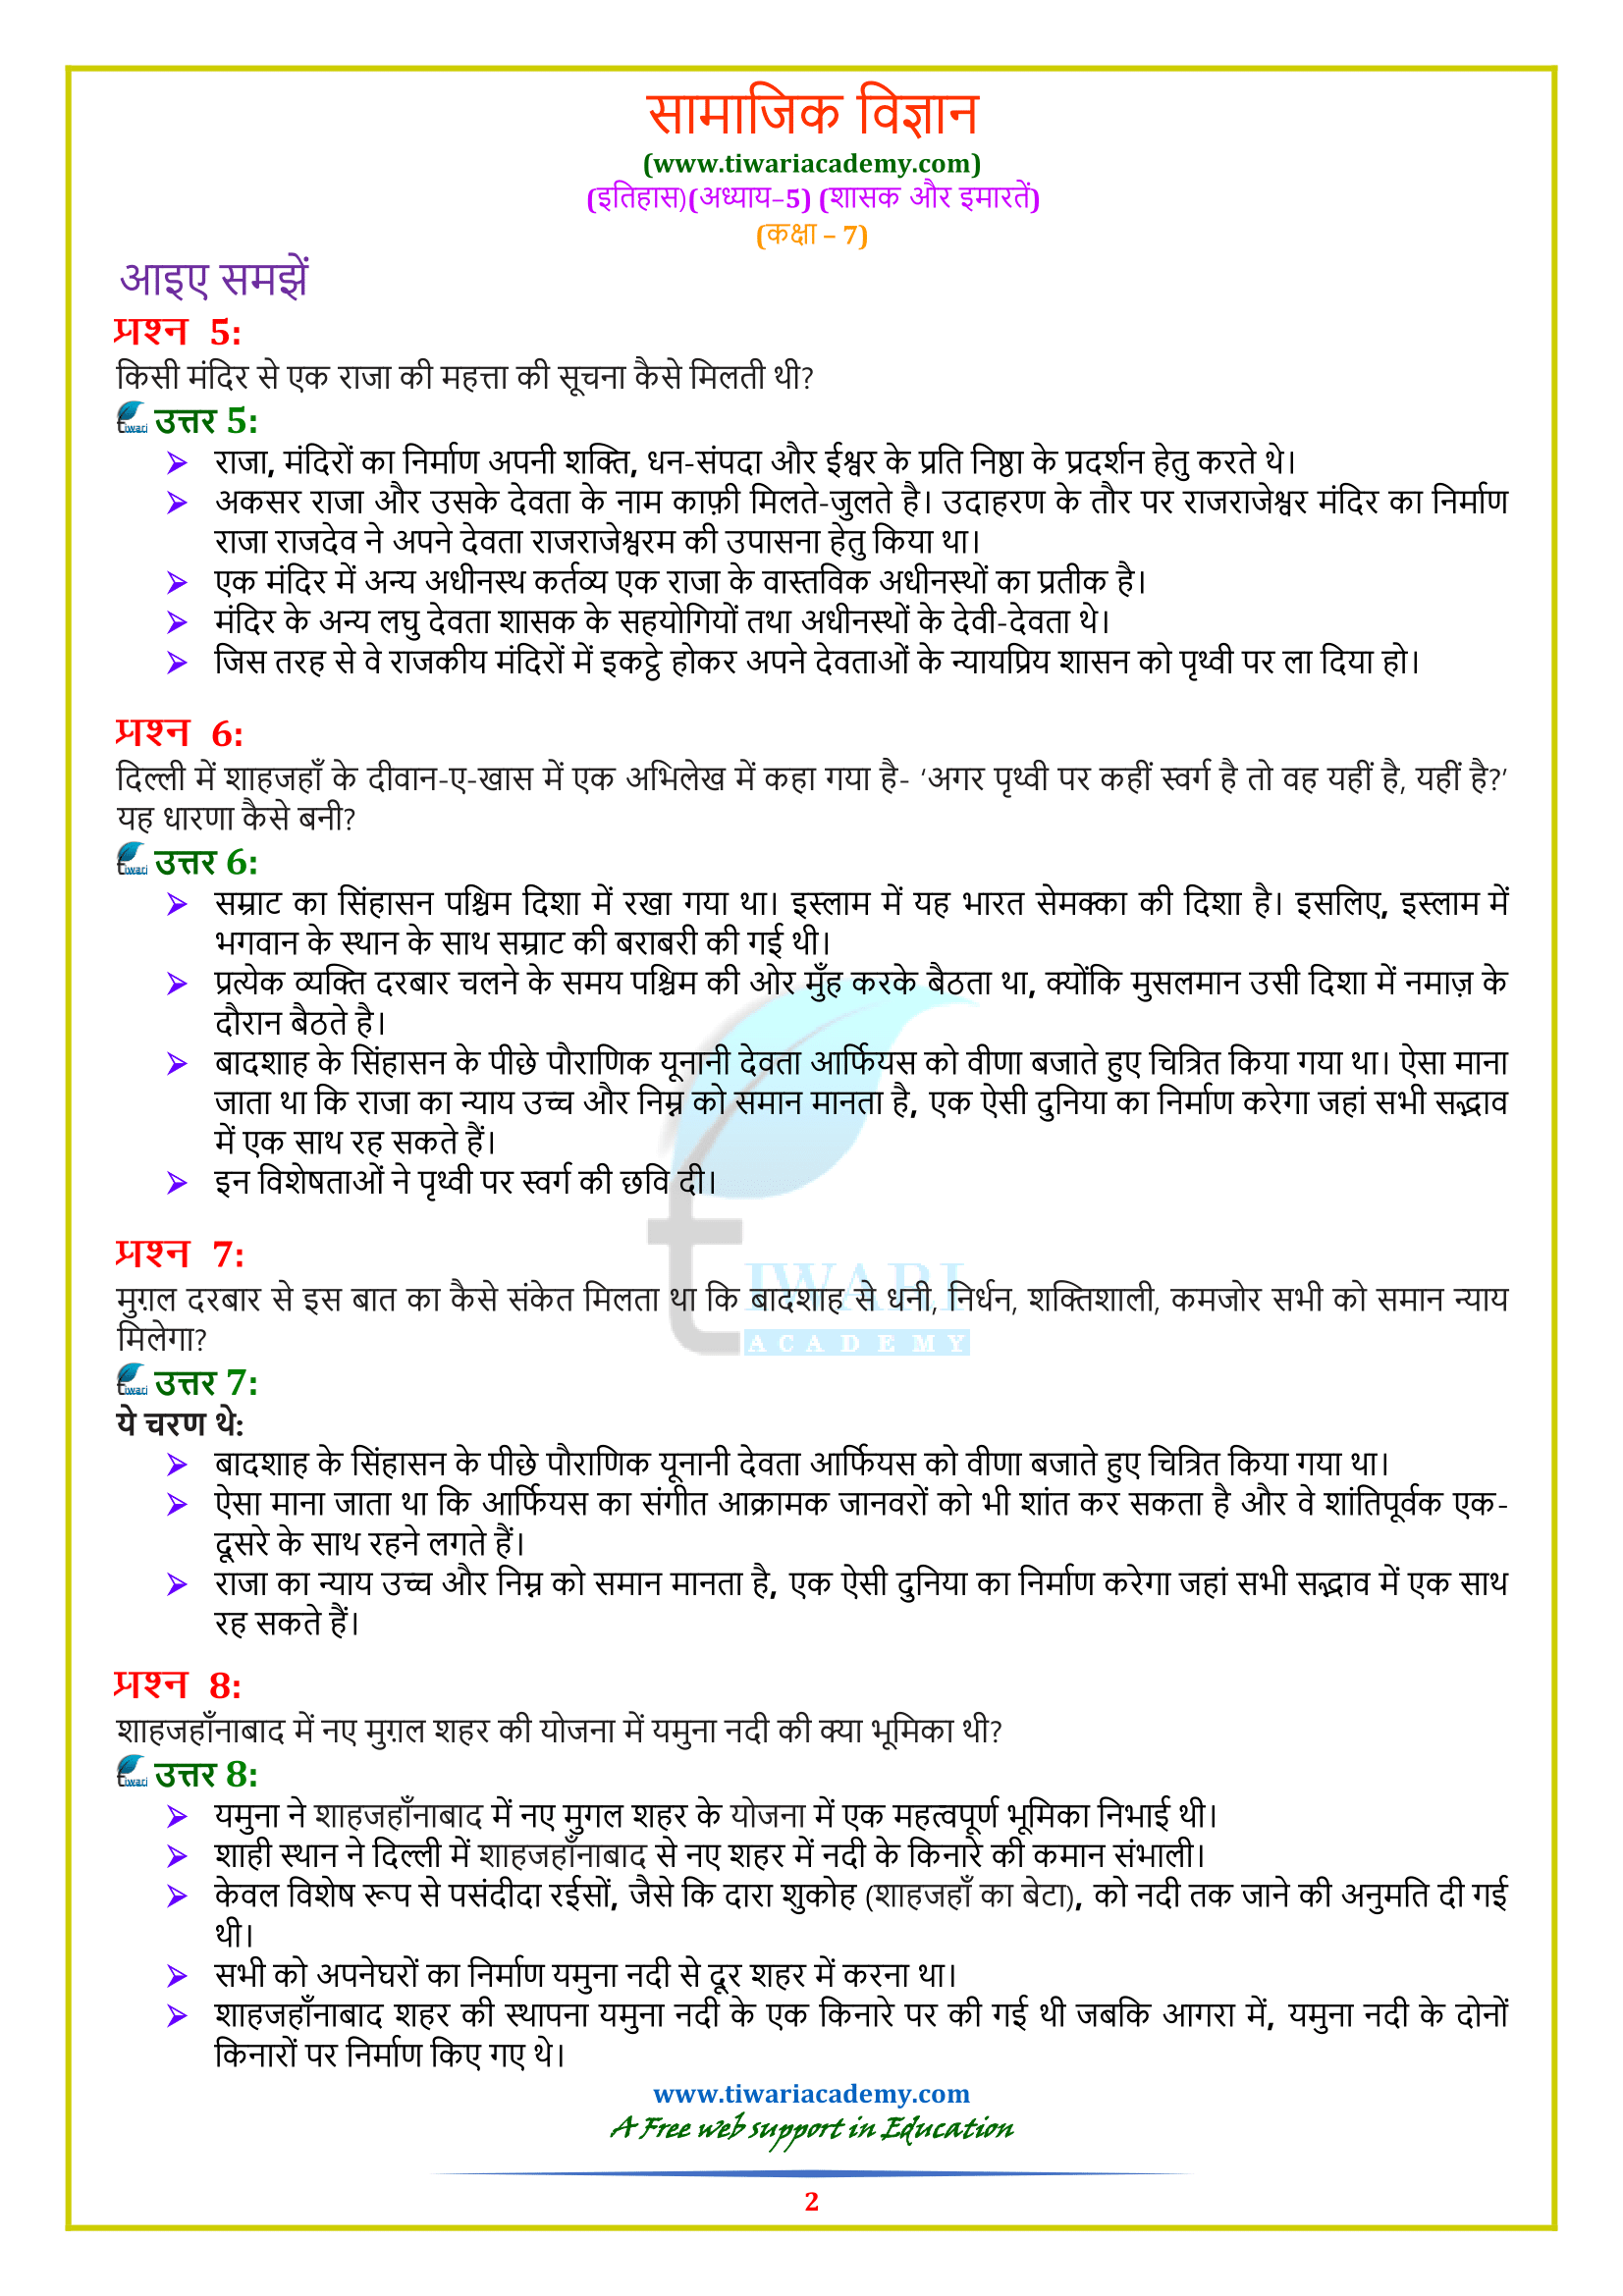 NCERT Solutions for Class 7 History Chapter 5 in Hindi